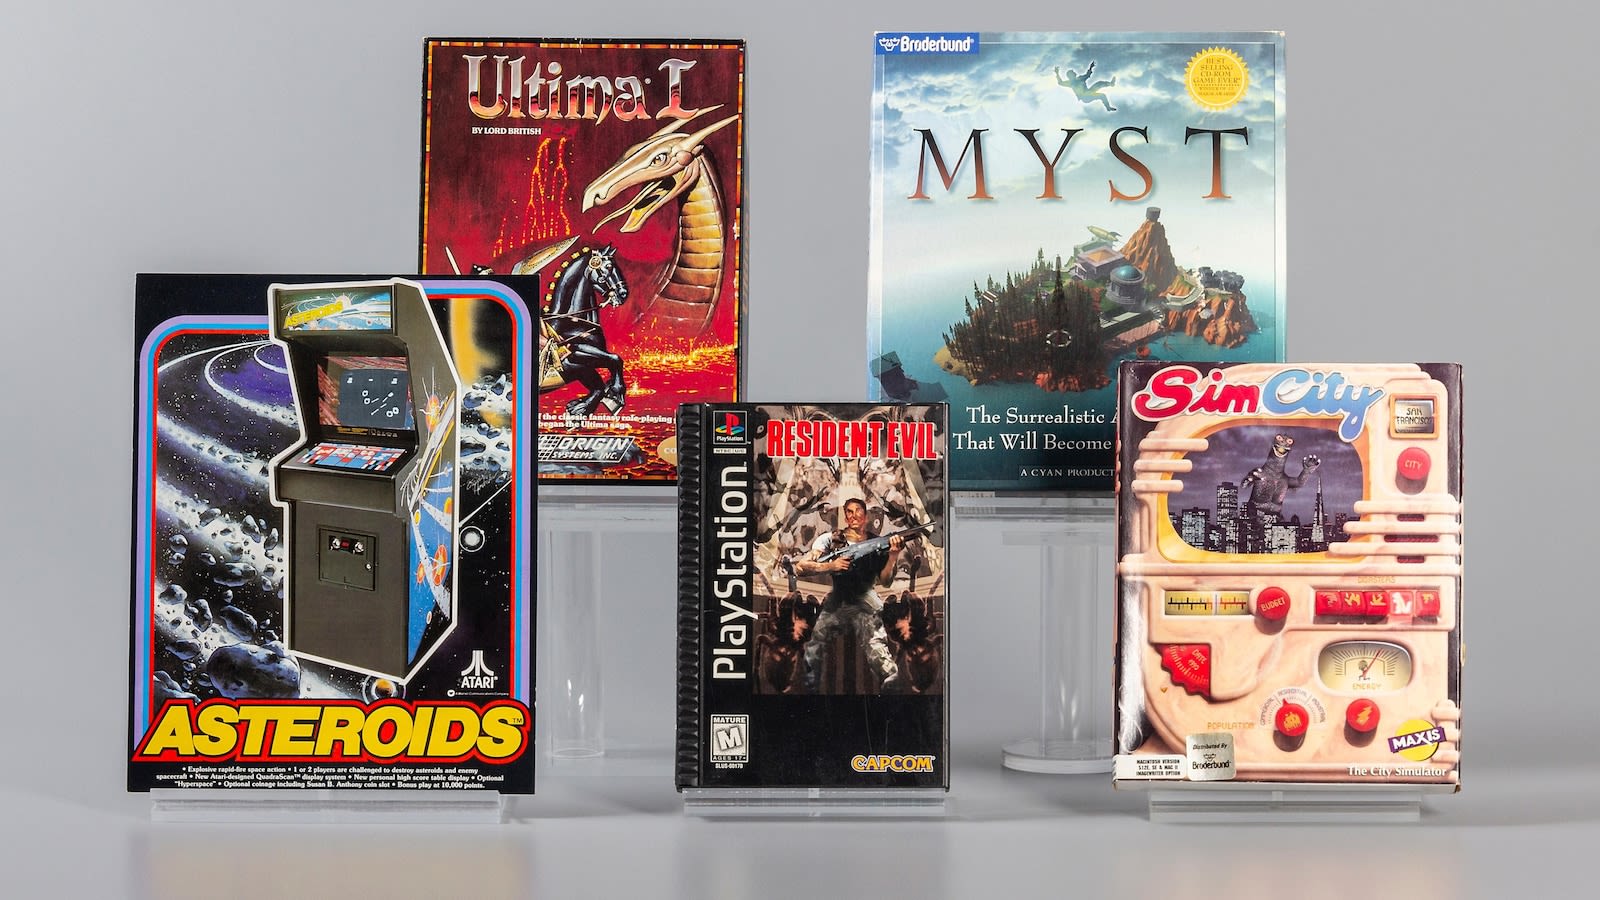 5 classic games inducted into World Video Game Hall of Fame